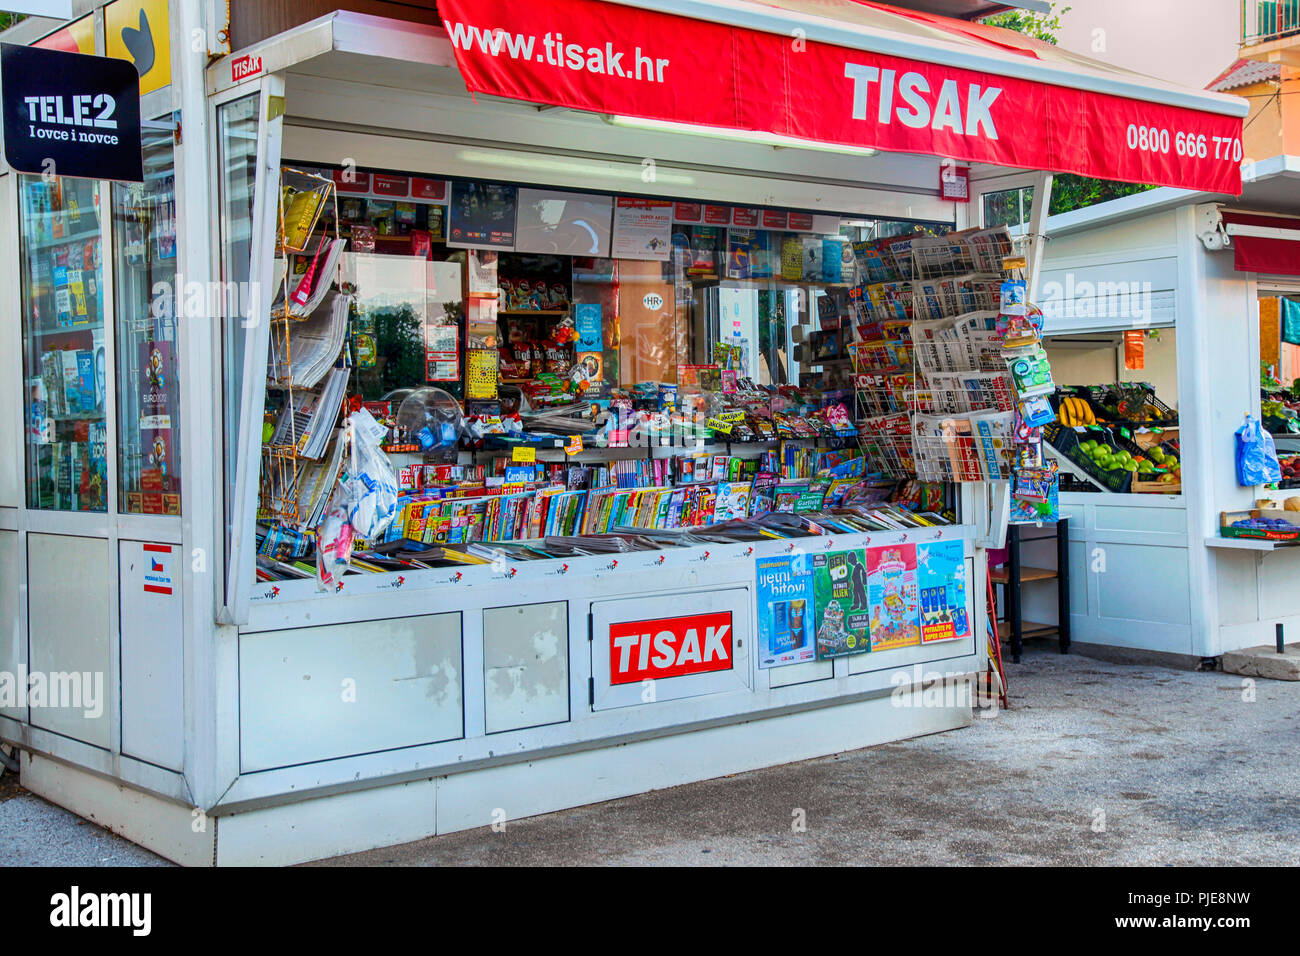 Newspapers, magazines and snack kiosk on the sidewalk near the beach at Baska on the Croatian island of Krk in the Adriatic.Sea Stock Photo